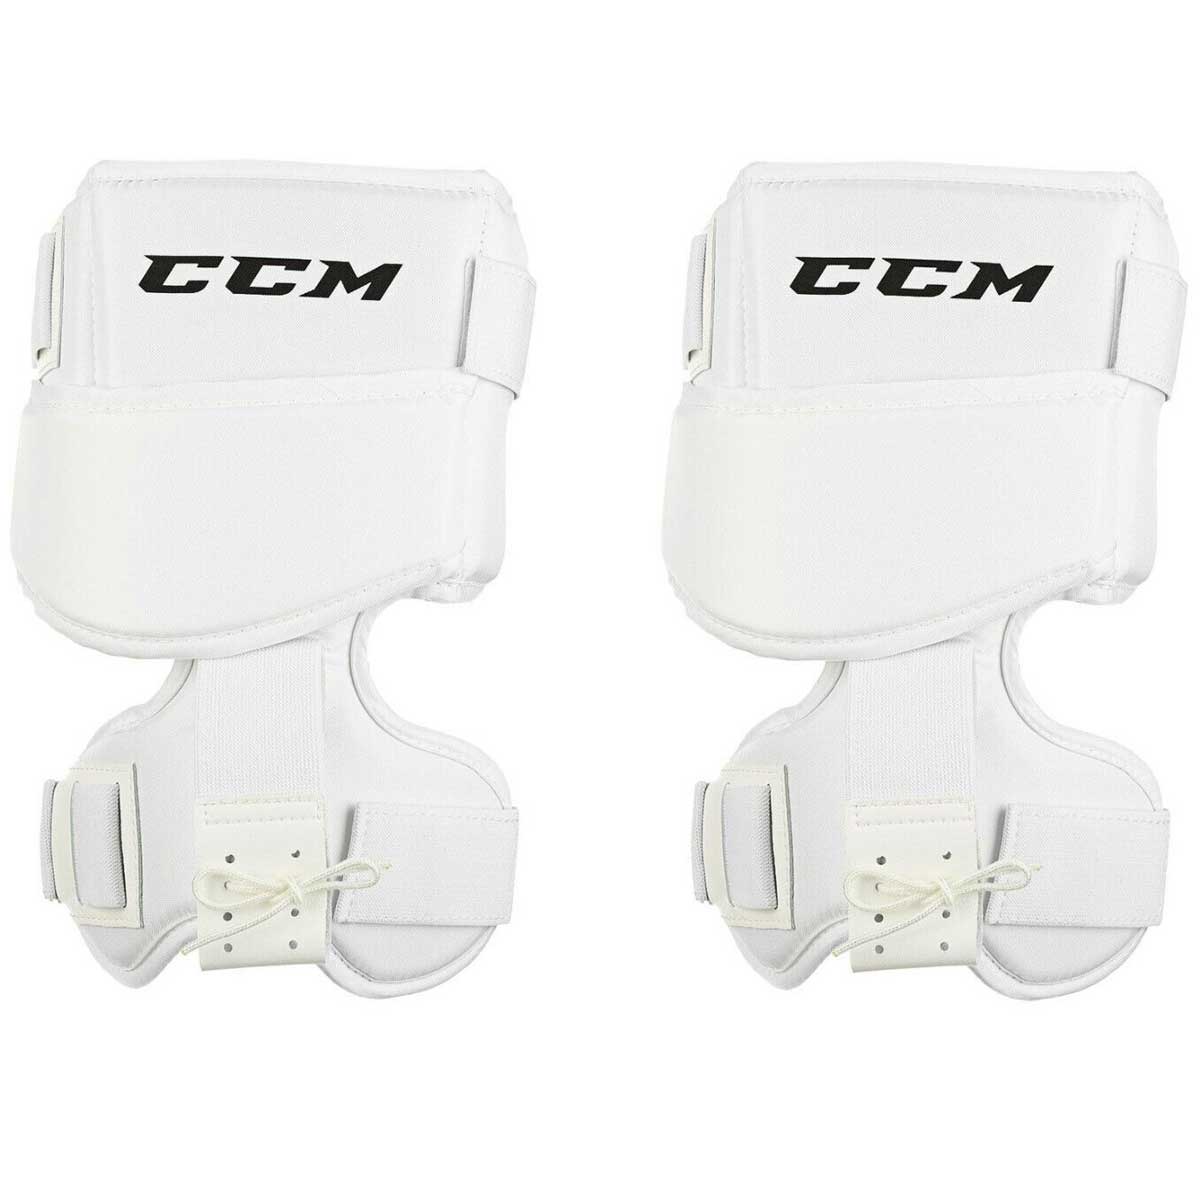 Full front picture of the CCM Legal Ice Hockey Goalie Thigh & Knee Pad